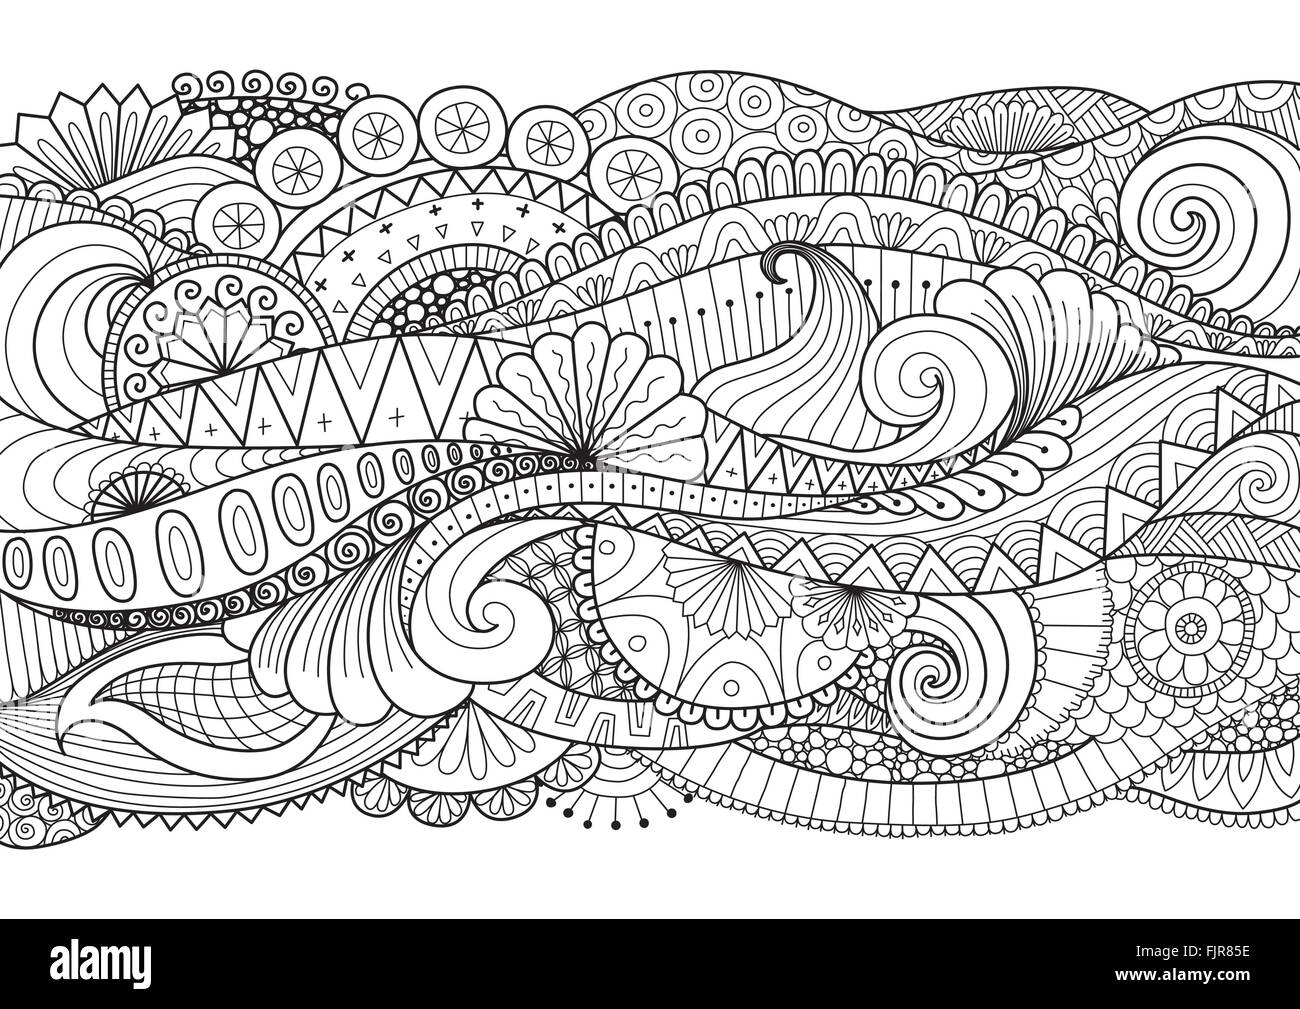 doodle art colouring pagesphoto